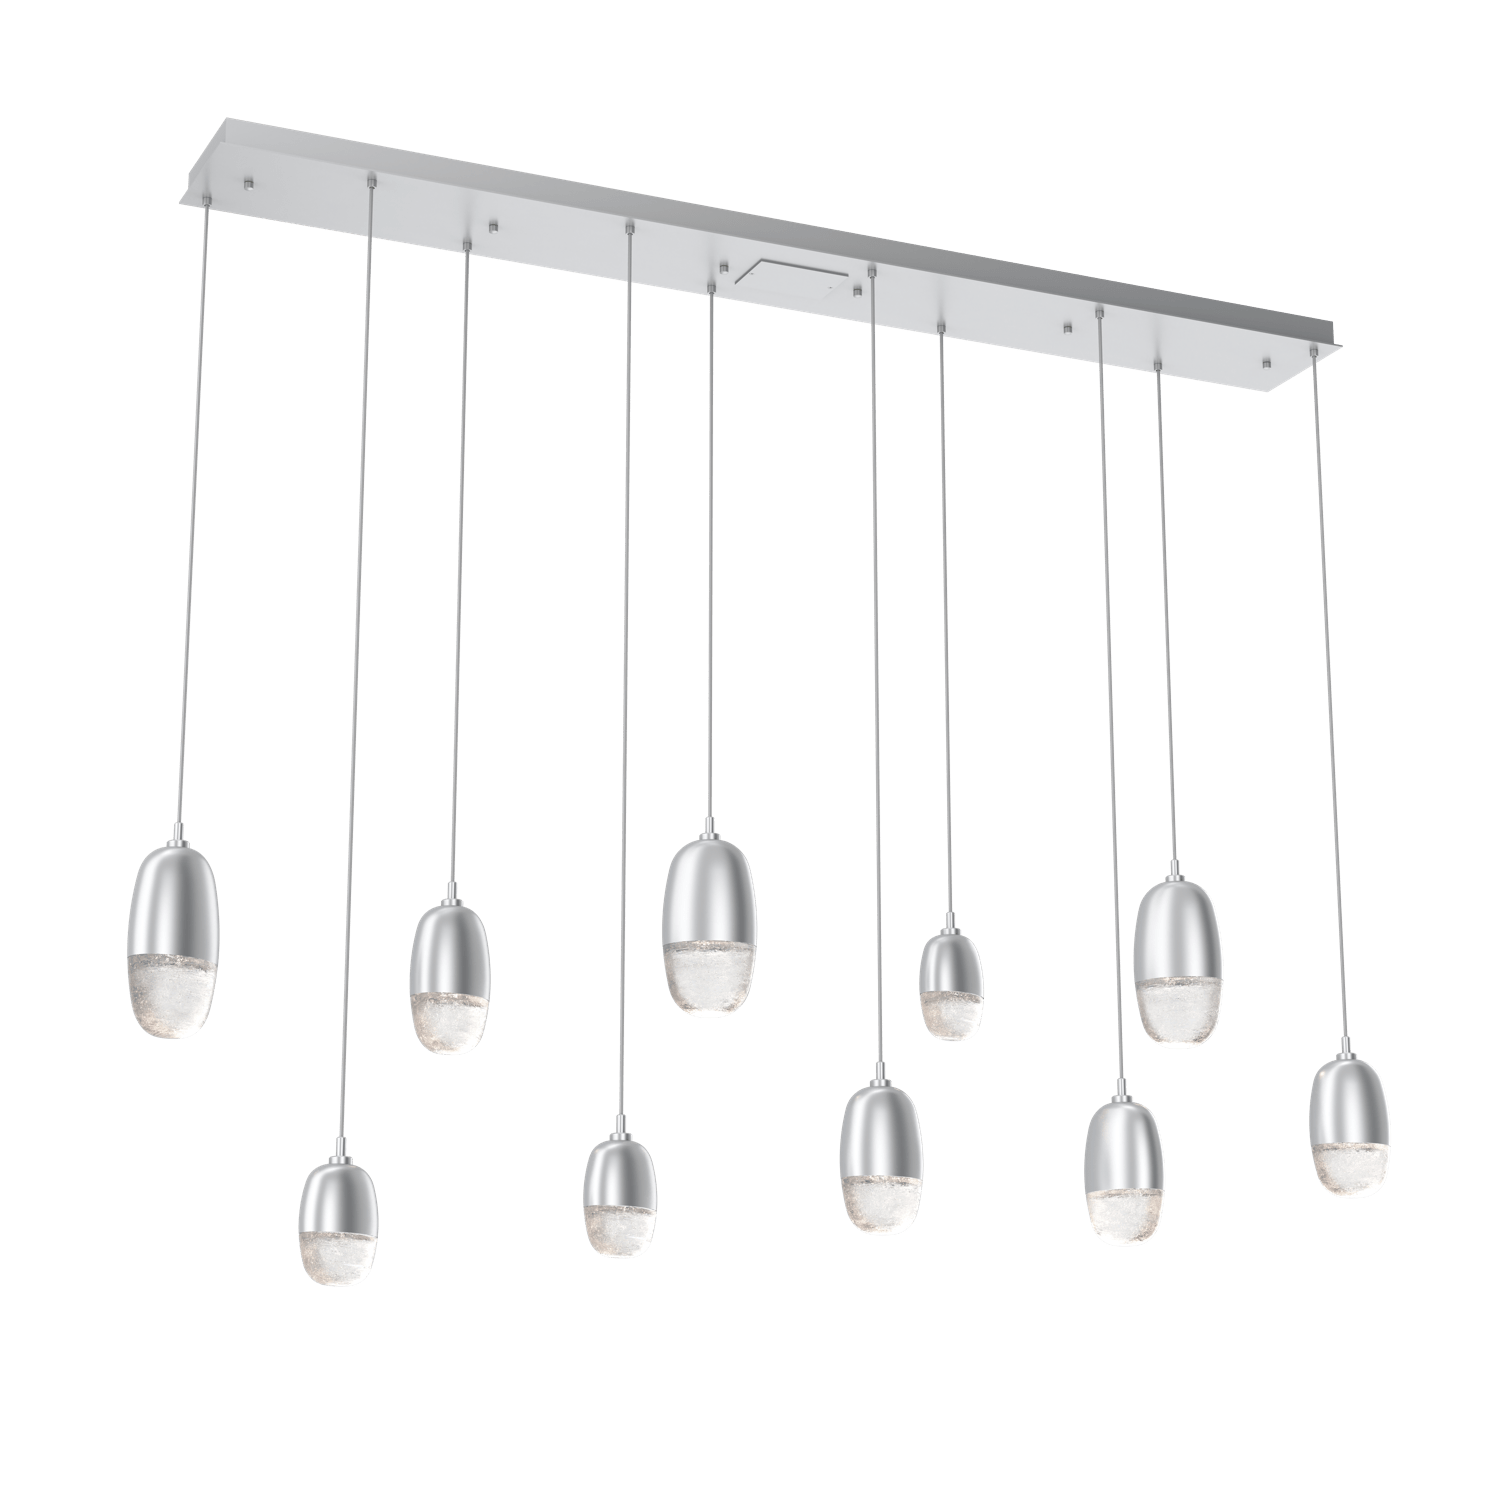 PLB0079-09-CS-Hammerton-Studio-Pebble-9-light-linear-pendant-chandelier-with-classic-silver-finish-and-clear-cast-glass-shades-and-LED-lamping